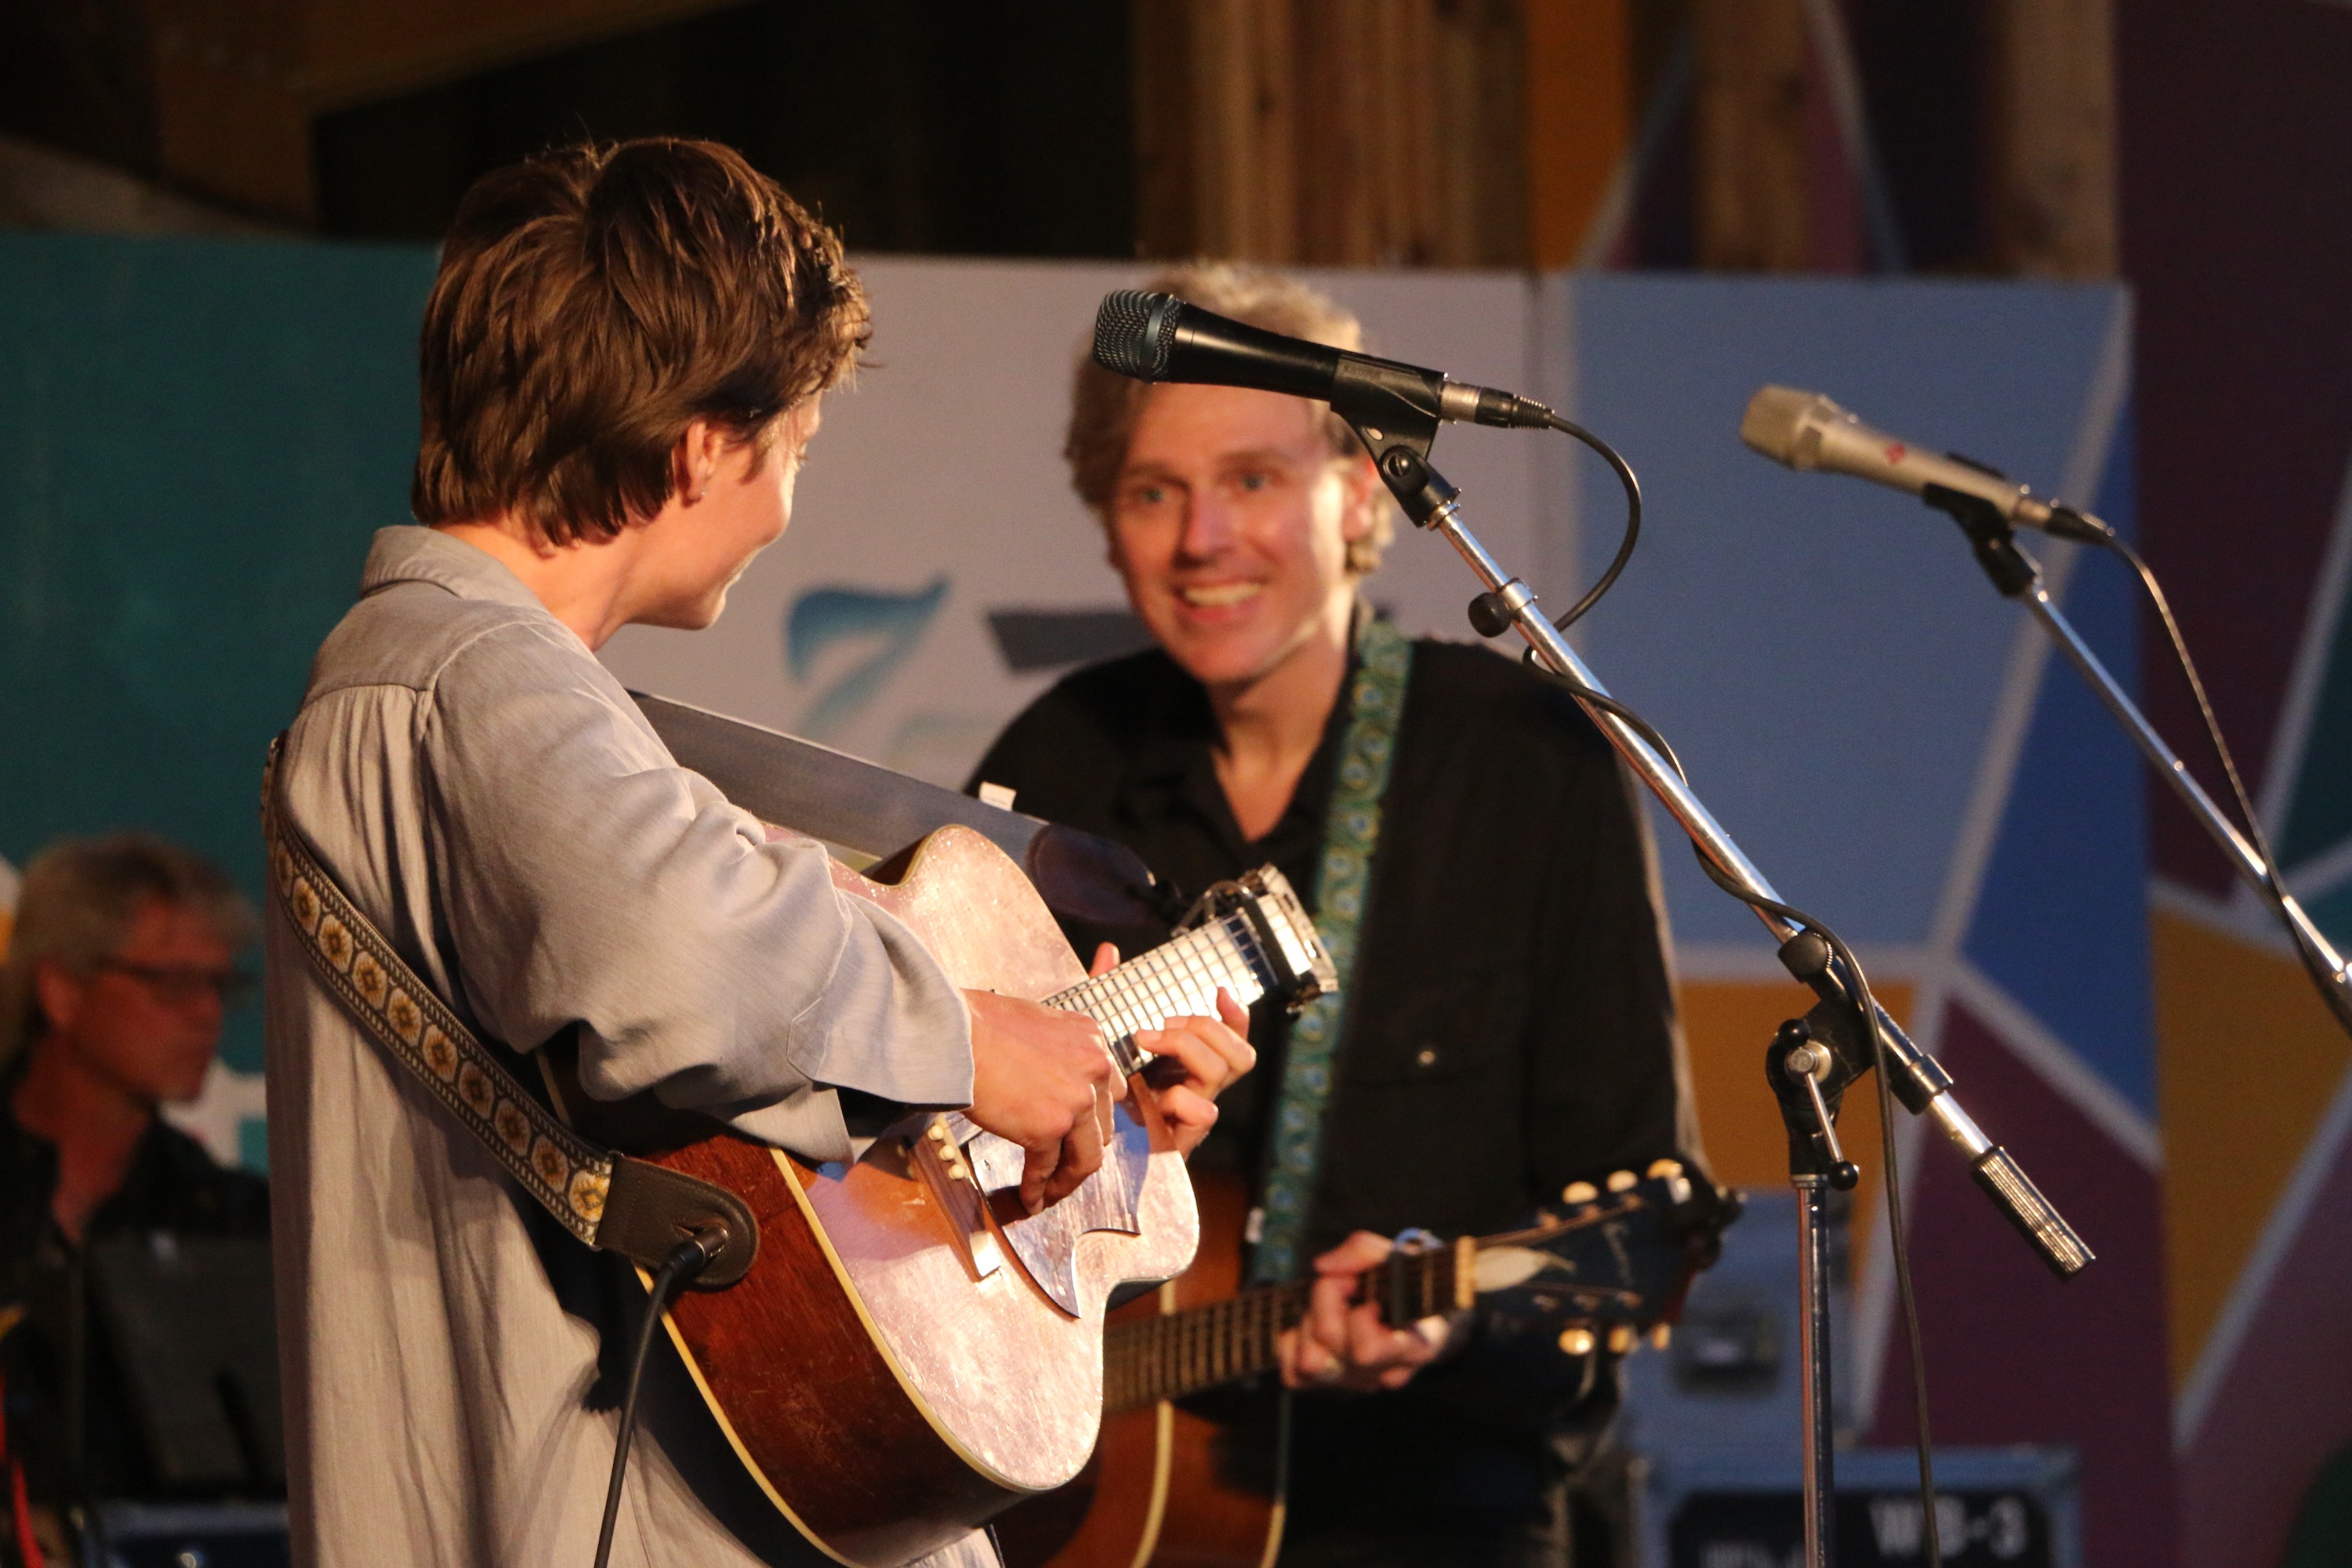 Mo Kenney joined Joel Plaskett on the main stage to close out the show